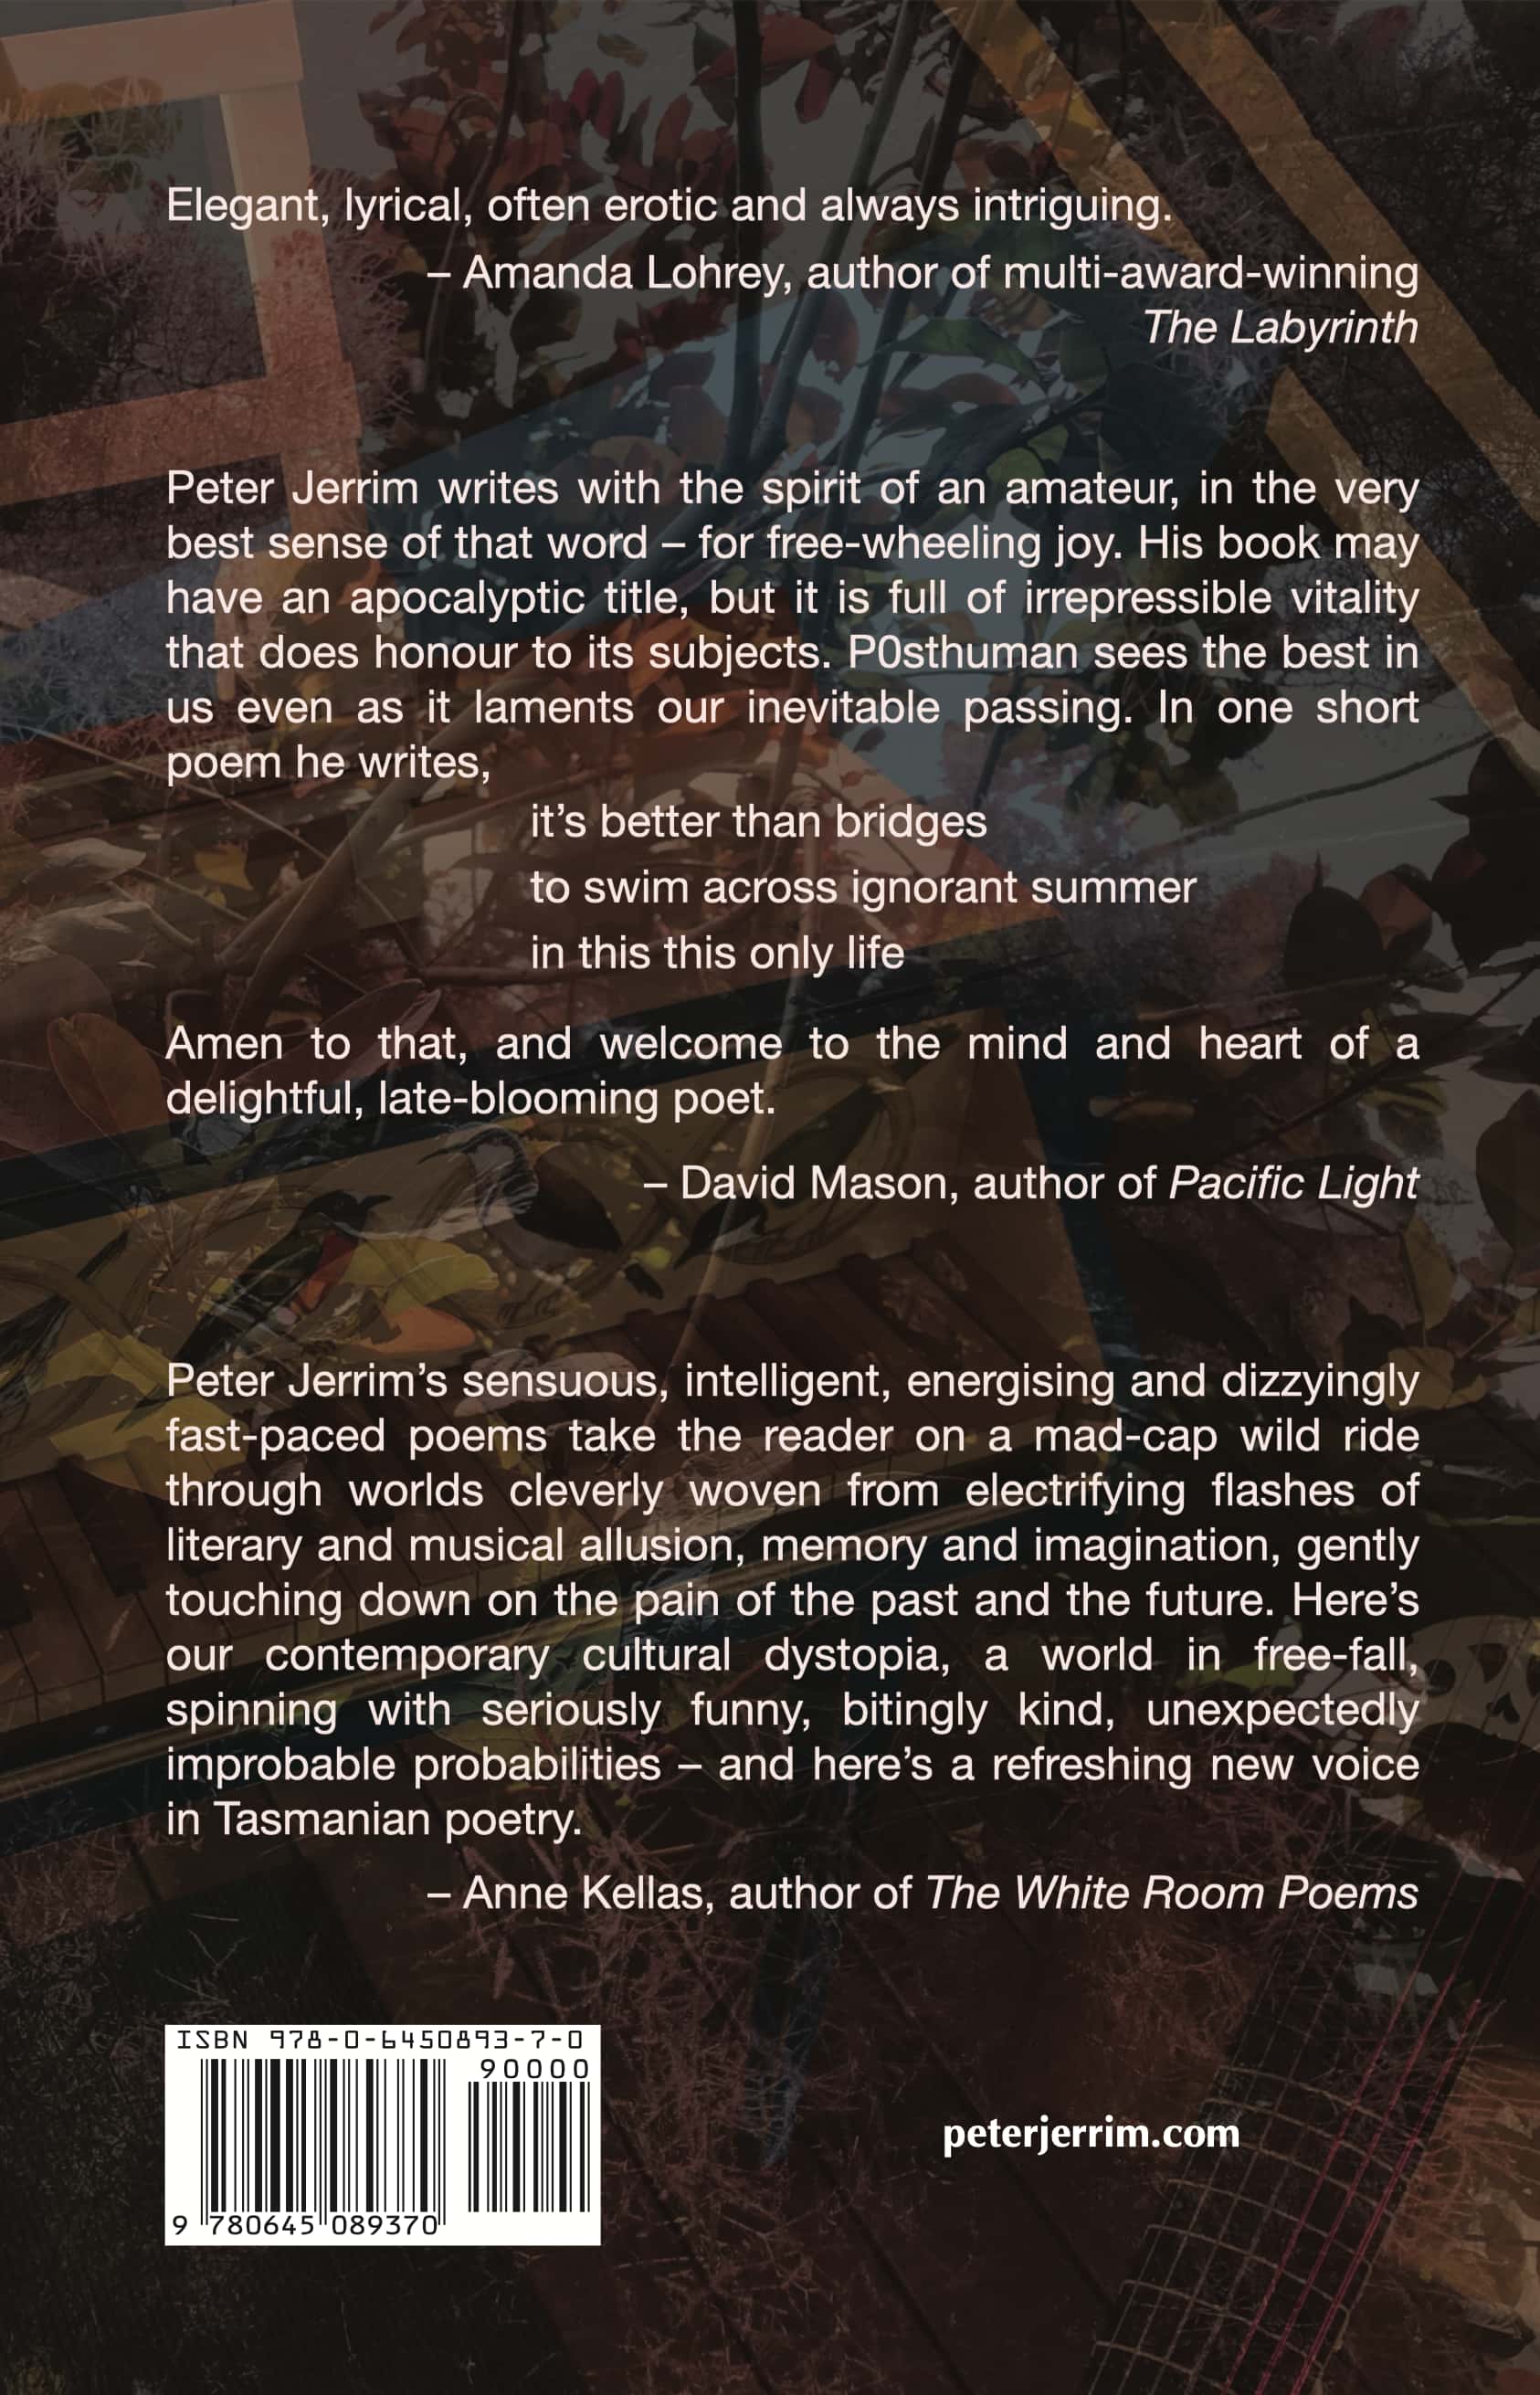 back cover of book with blurb and testimonials: Endorsement by Amanda Lohrey, author of multi-award-winning  The Labyrinth: Elegant, lyrical, often erotic and always intriguing. Endorsement by David Mason, author of Pacific Light: Peter Jerrim writes with the spirit of an amateur, in the very best sense of that word - for free-wheeling joy. His book may have an apocalyptic title, but it is full of irrepressible vitality that does honour to its subjects. P0sthuman sees the best in us even as it laments our inevitable passing. In one short poem he writes, it’s better than bridges to swim across ignorant summer in this this only life. Amen to that, and welcome to the mind and heart of a delightful, late-blooming poet. Endorsement by Anne Kellas, author of The White Room Poems: Peter Jerrim’s sensuous, intelligent, energising and dizzyingly fast-paced poems take the reader on a mad-cap wild ride through worlds cleverly woven from electrifying flashes of literary and musical allusion, memory and imagination, gently touching down on the pain of the past and the future. Here’s our contemporary cultural dystopia, a world in free-fall, spinning with seriously funny, bitingly kind, unexpectedly improbable probabilities - and here’s a refreshing new voice in Tasmanian poetry.